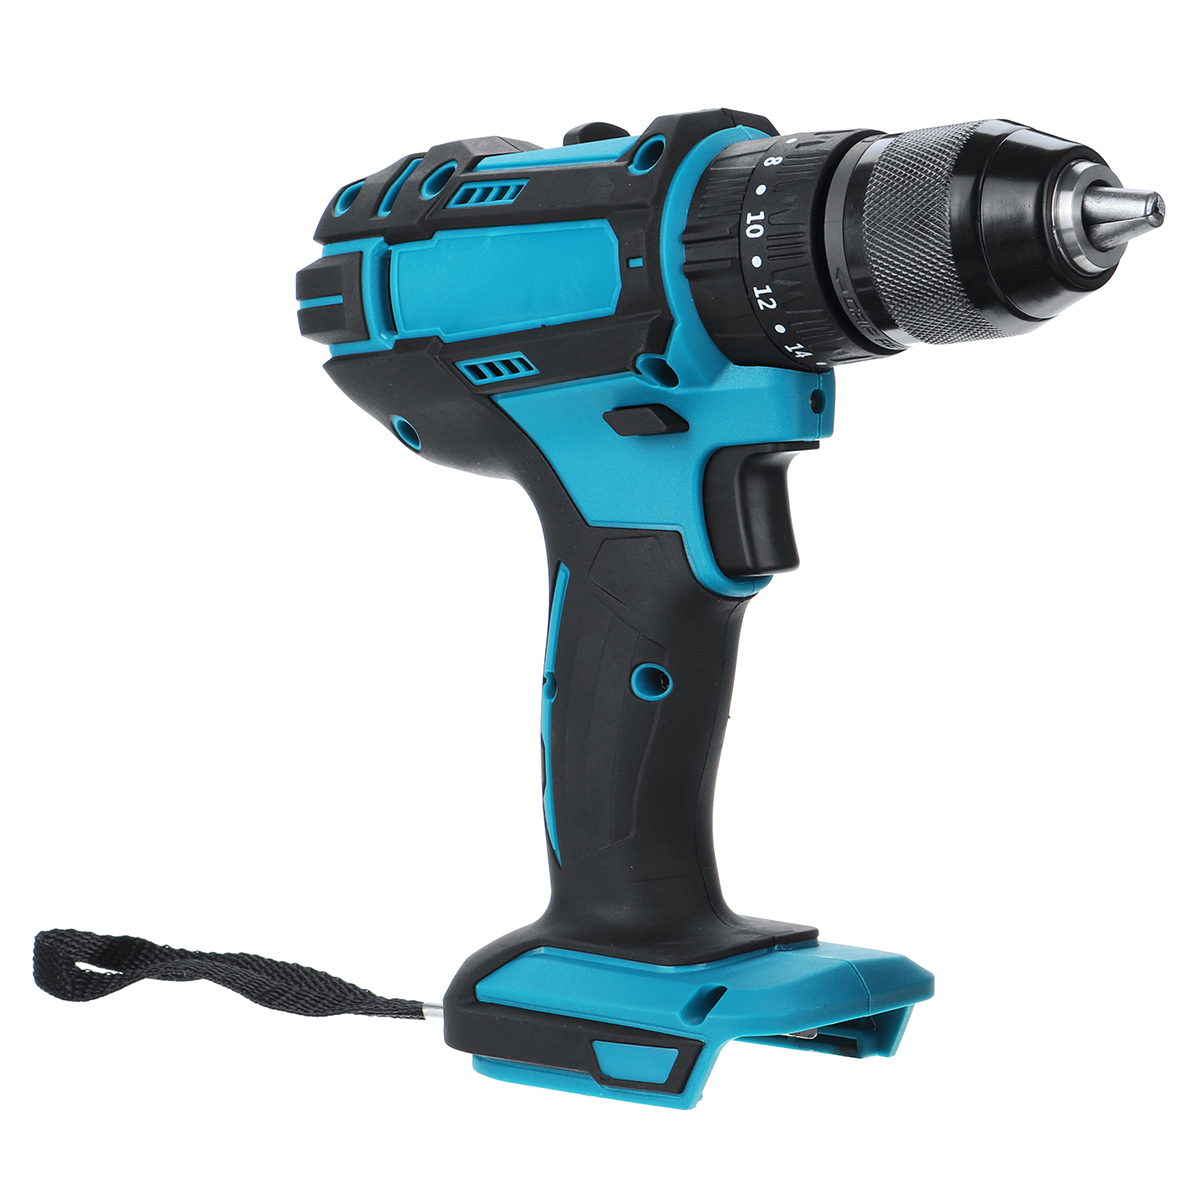 Drillpro-10mm-Chuck-Impact-Drill-350Nm-Cordless-Electric-Drill-For-Makita18V-Battery-4000RPM-LED-Lig-1642853-11